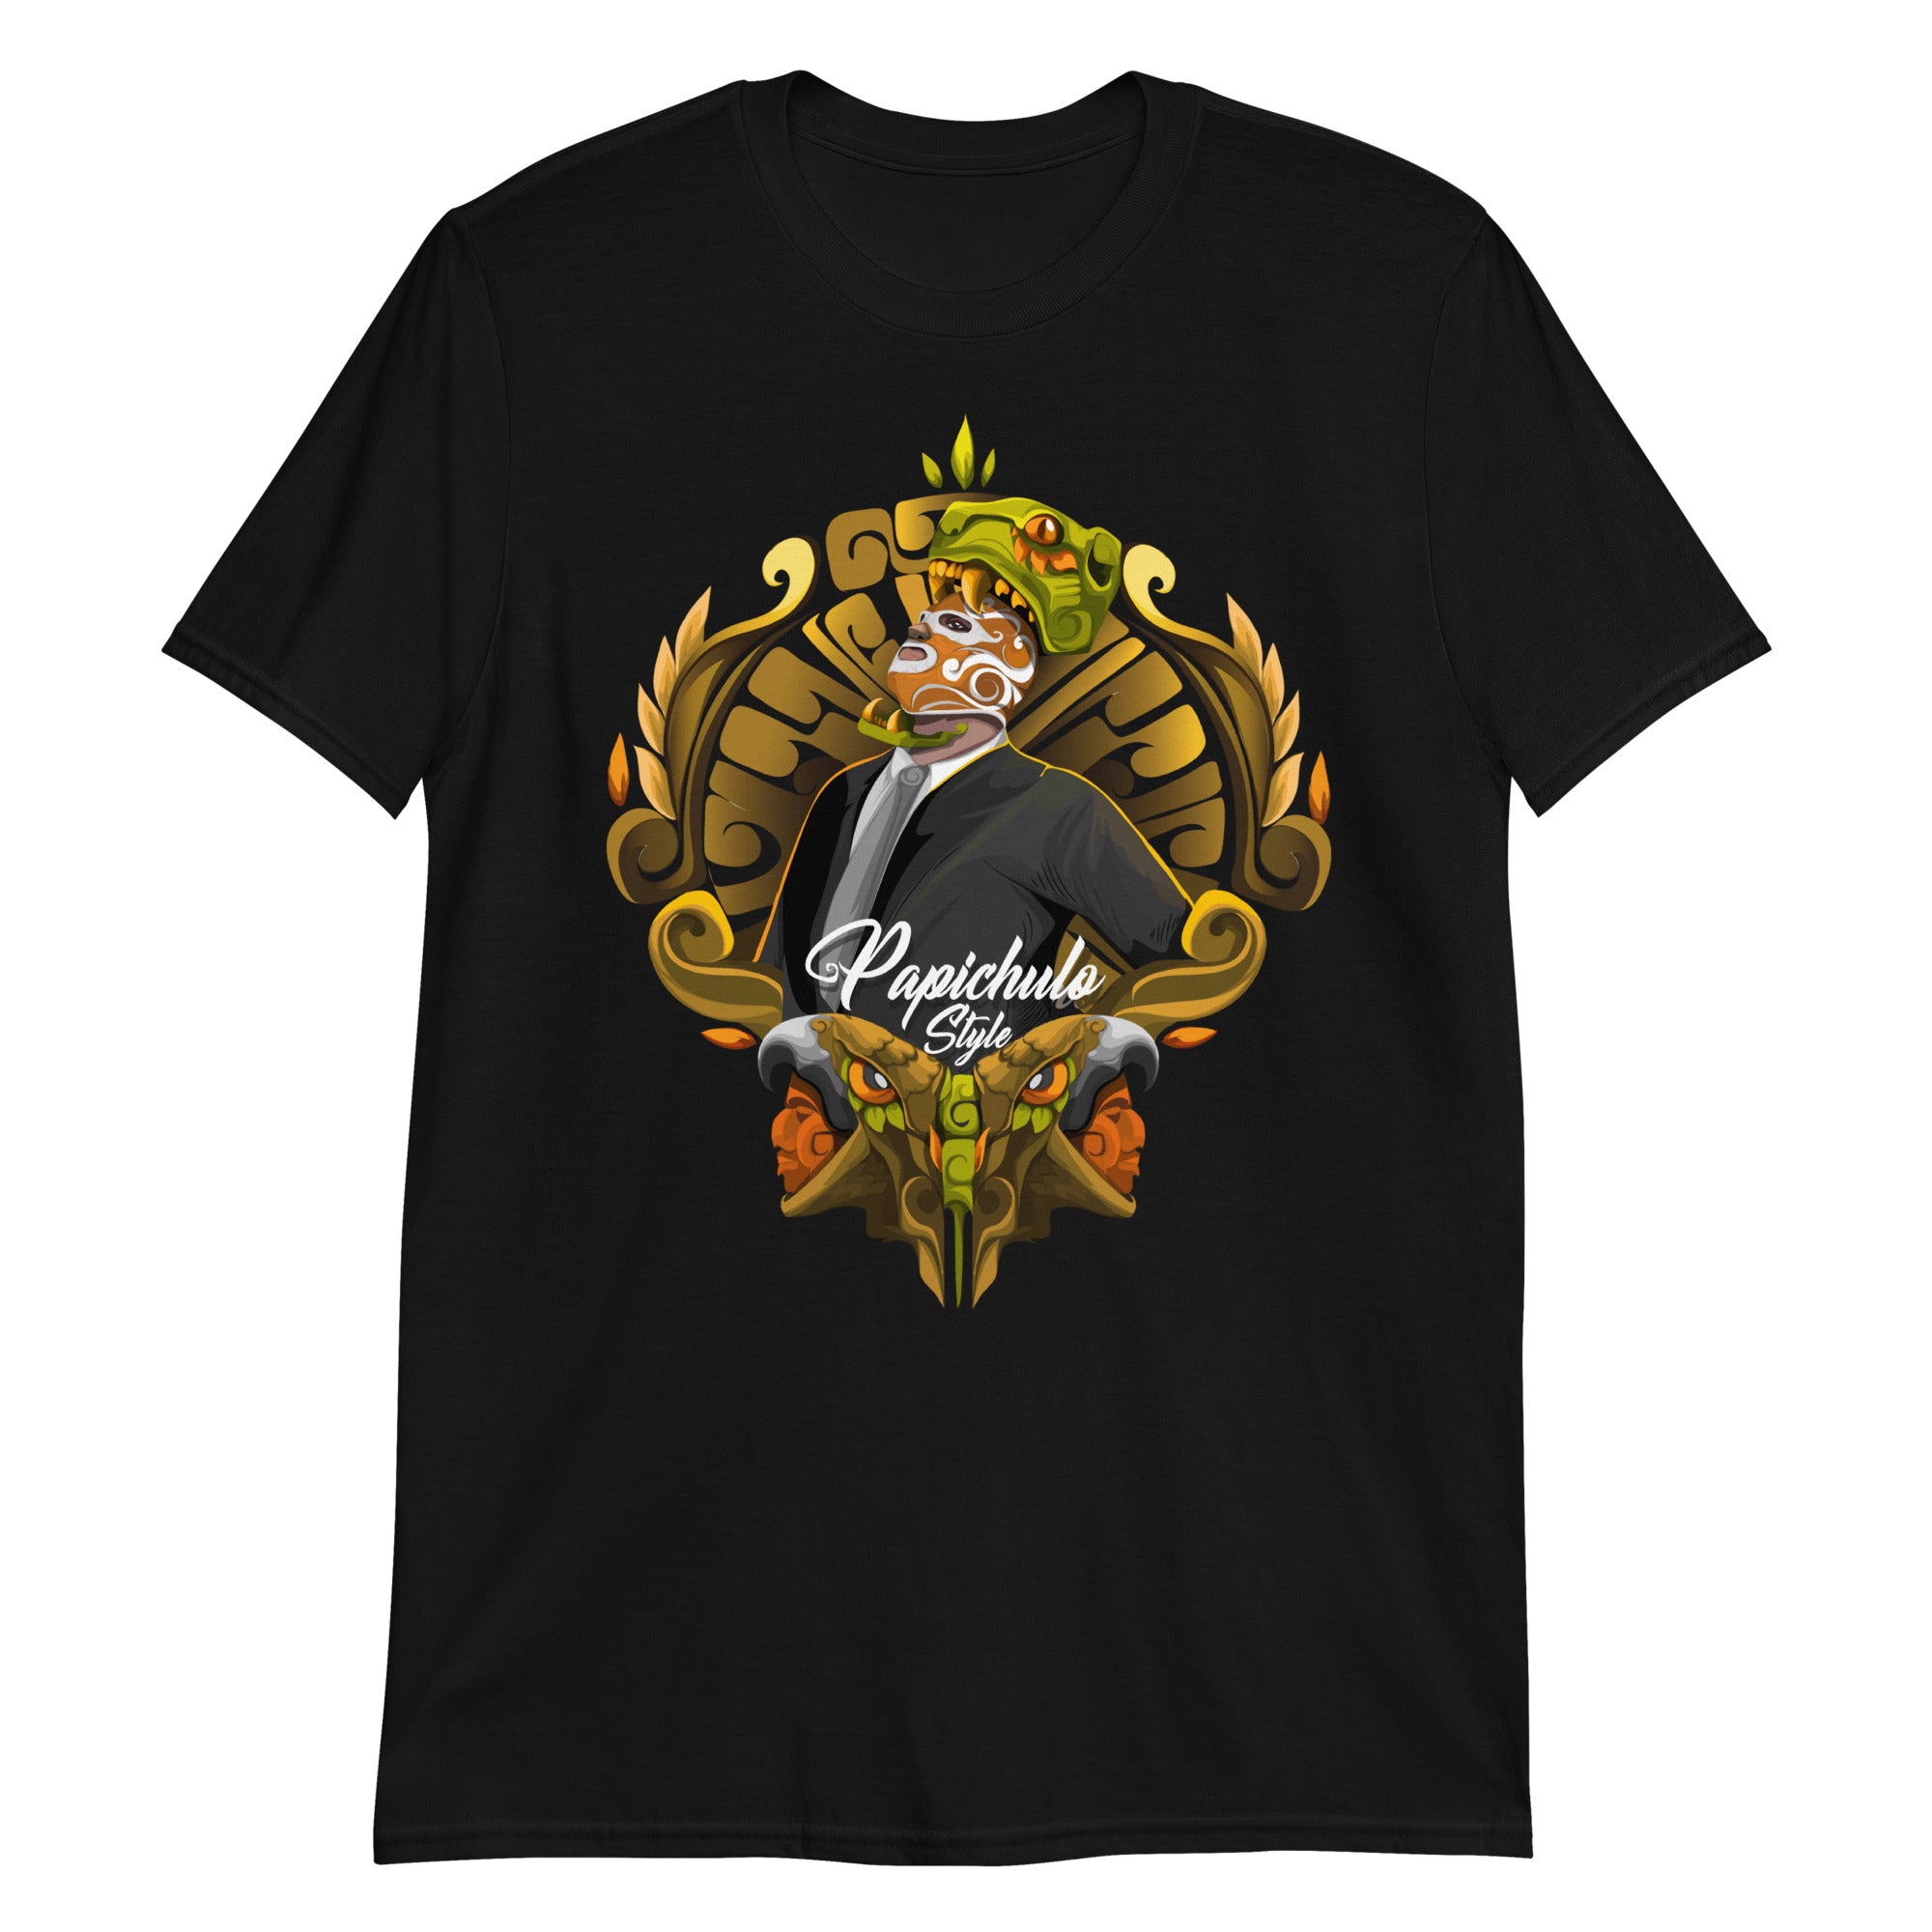 T-Shirt Design By Hidrock - Papichulo Style